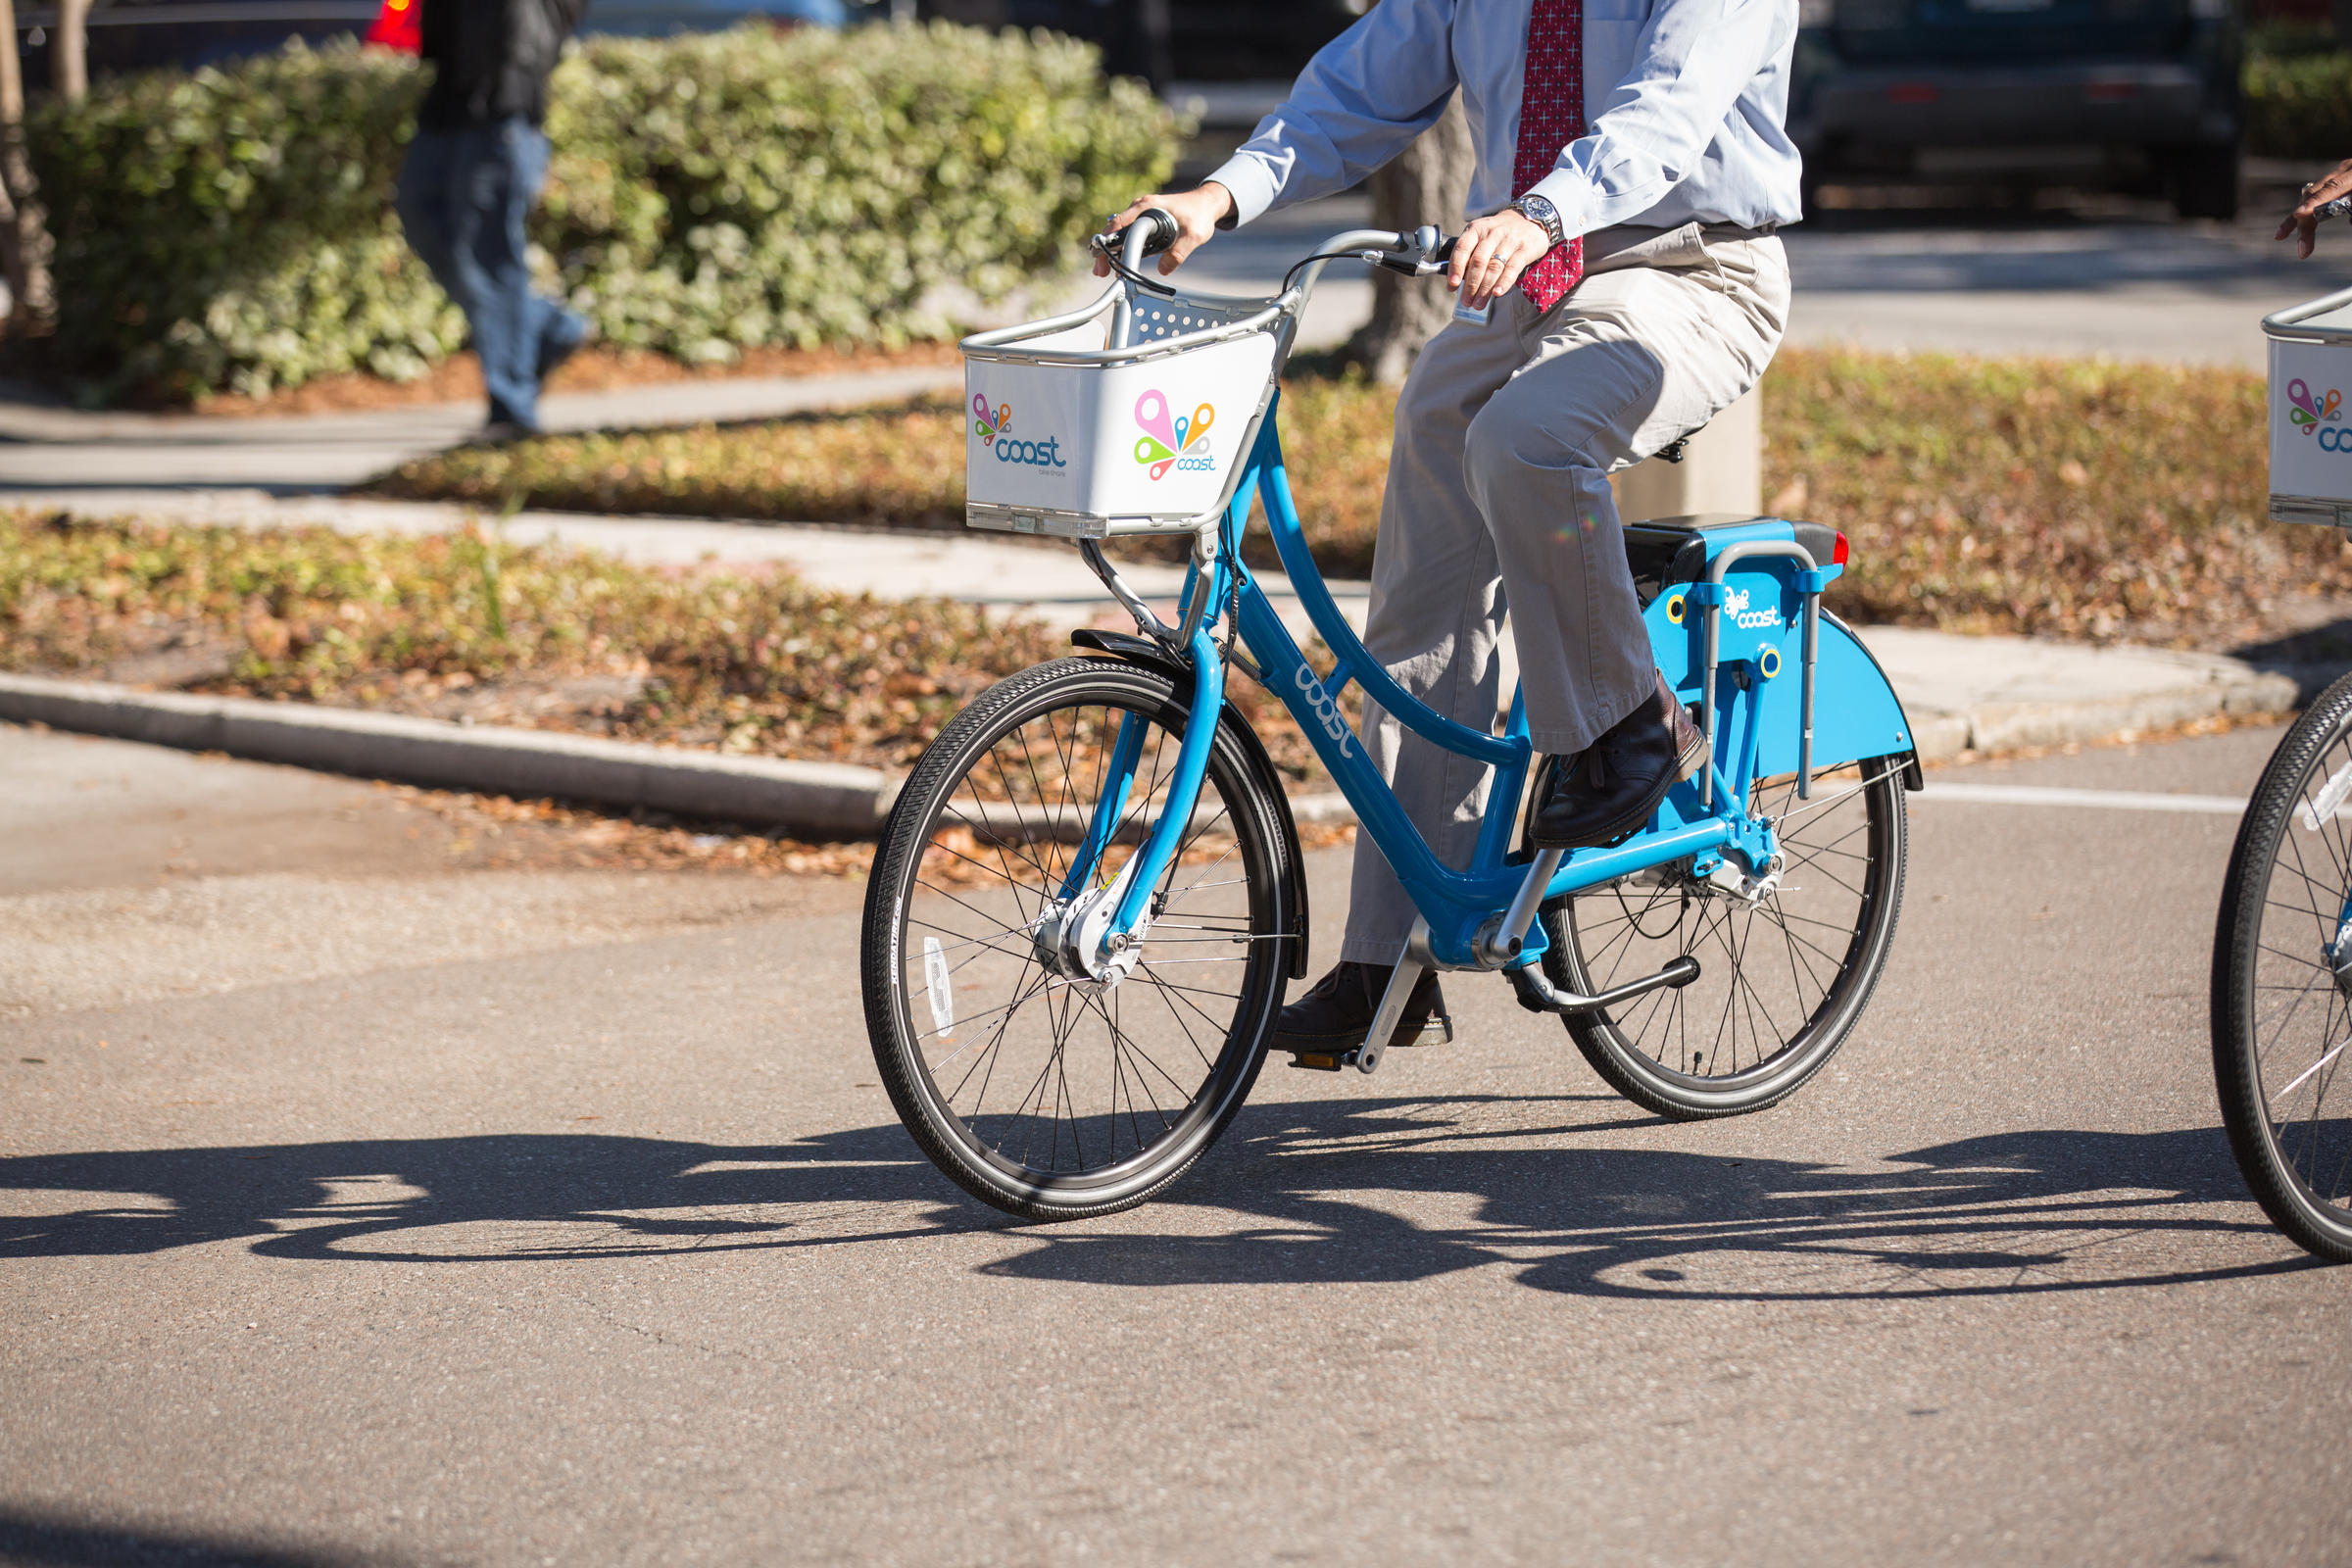 St. Louis hopes ‘dockless’ bike share program will begin this year | St. Louis Public Radio